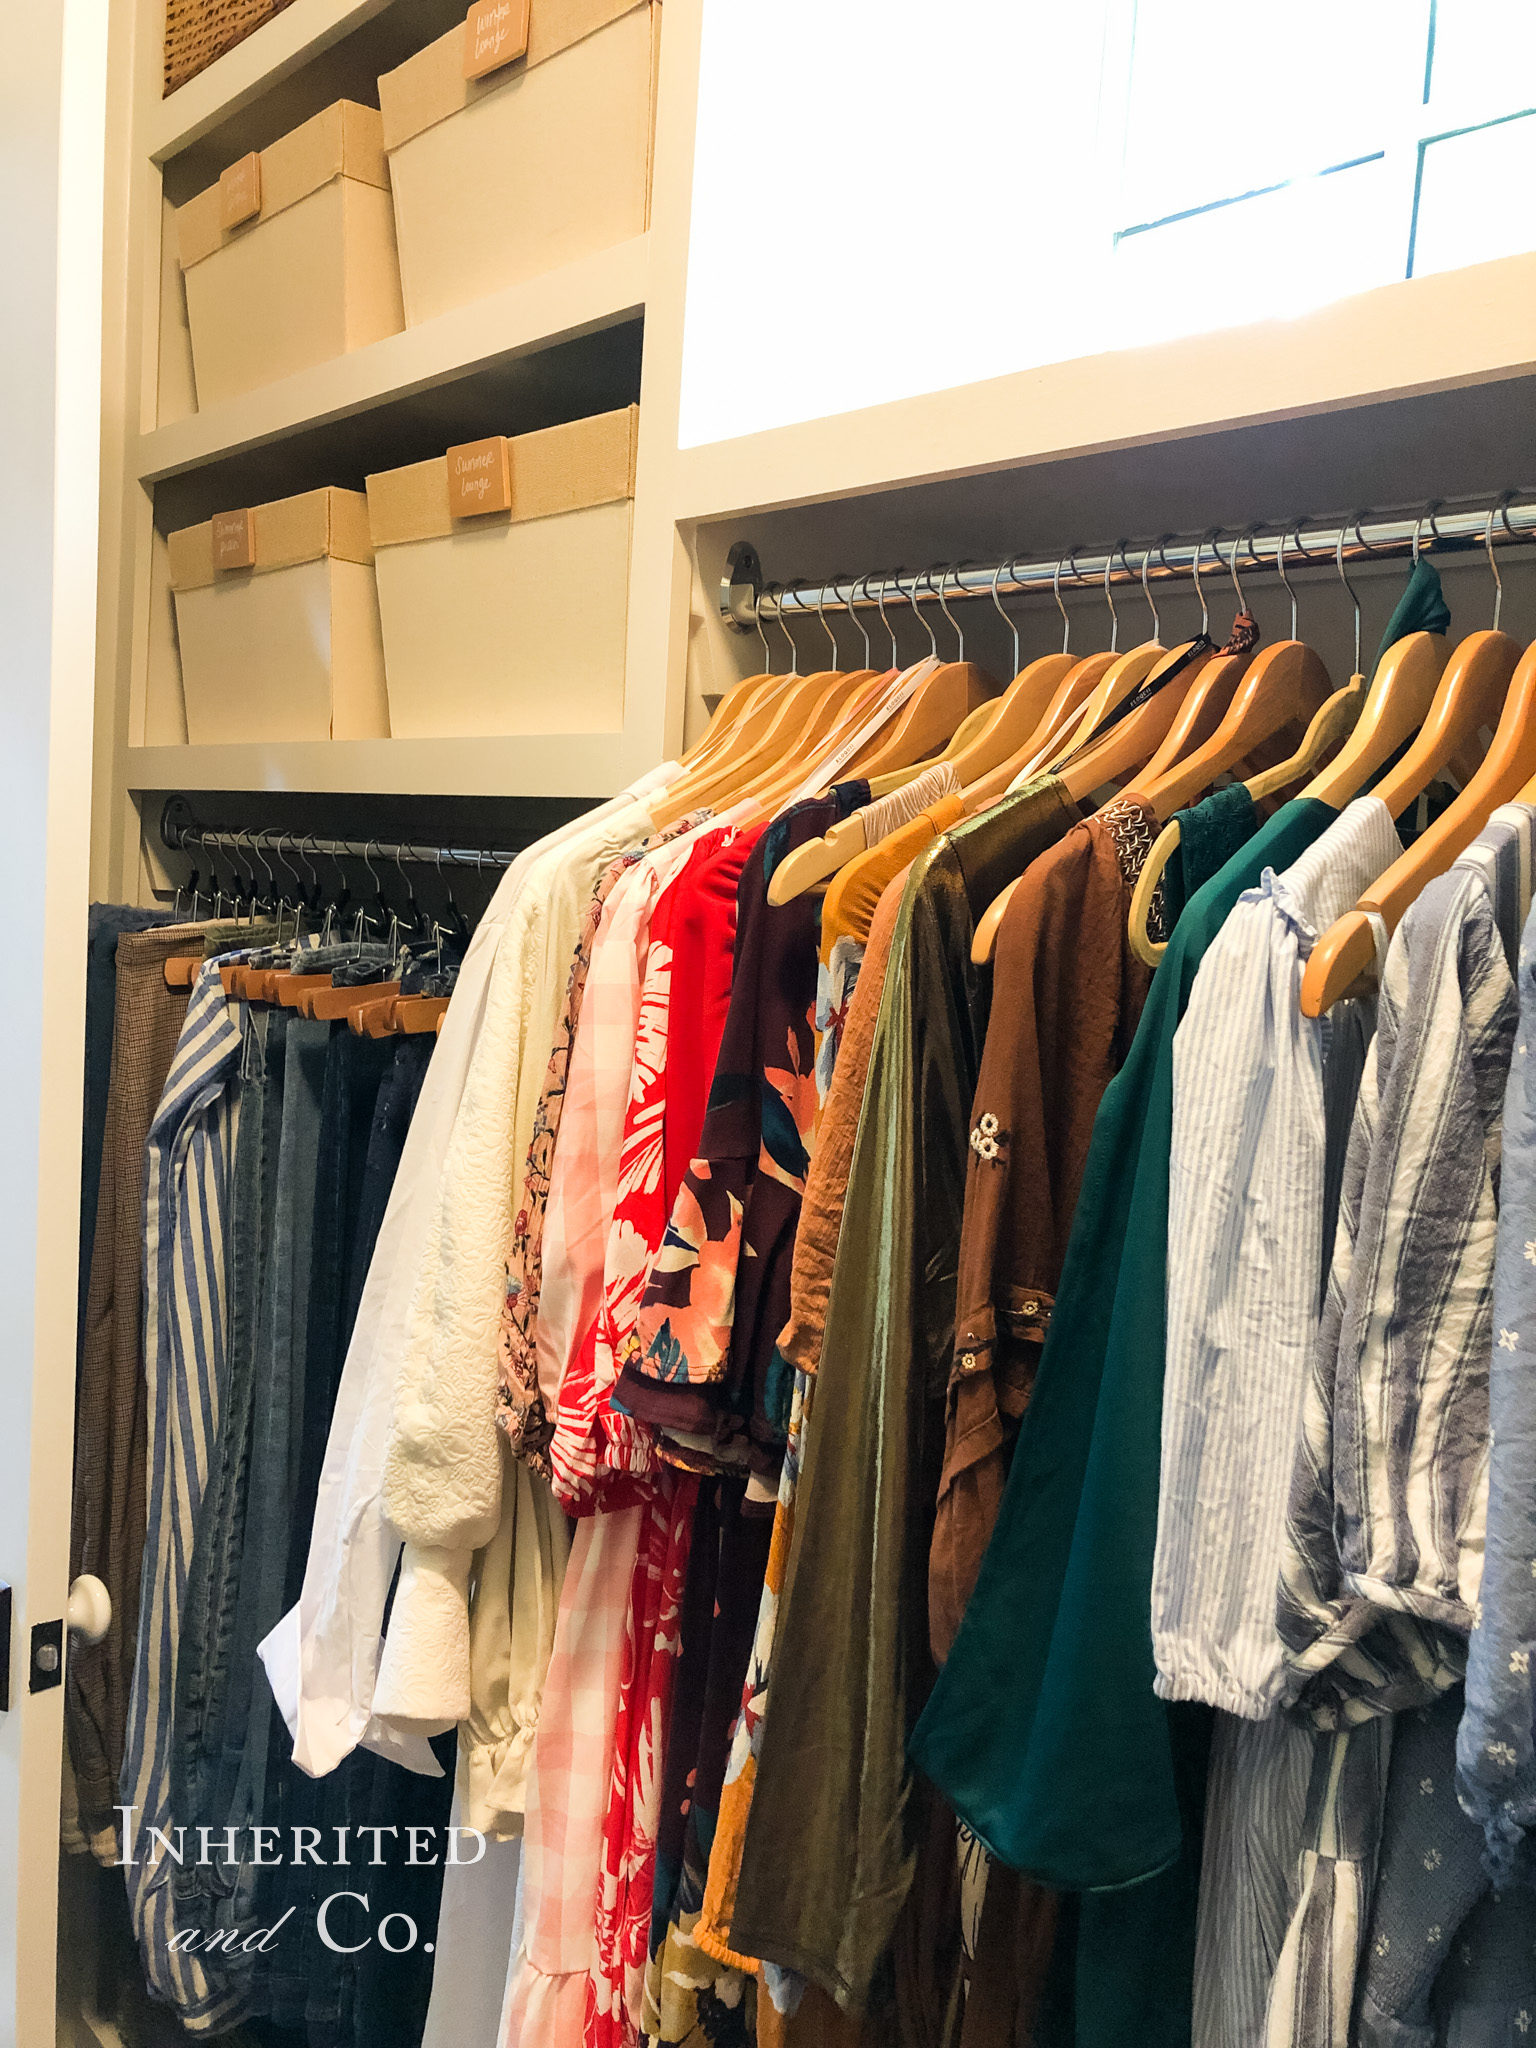 Dresses, pants, and bins in an organized closet